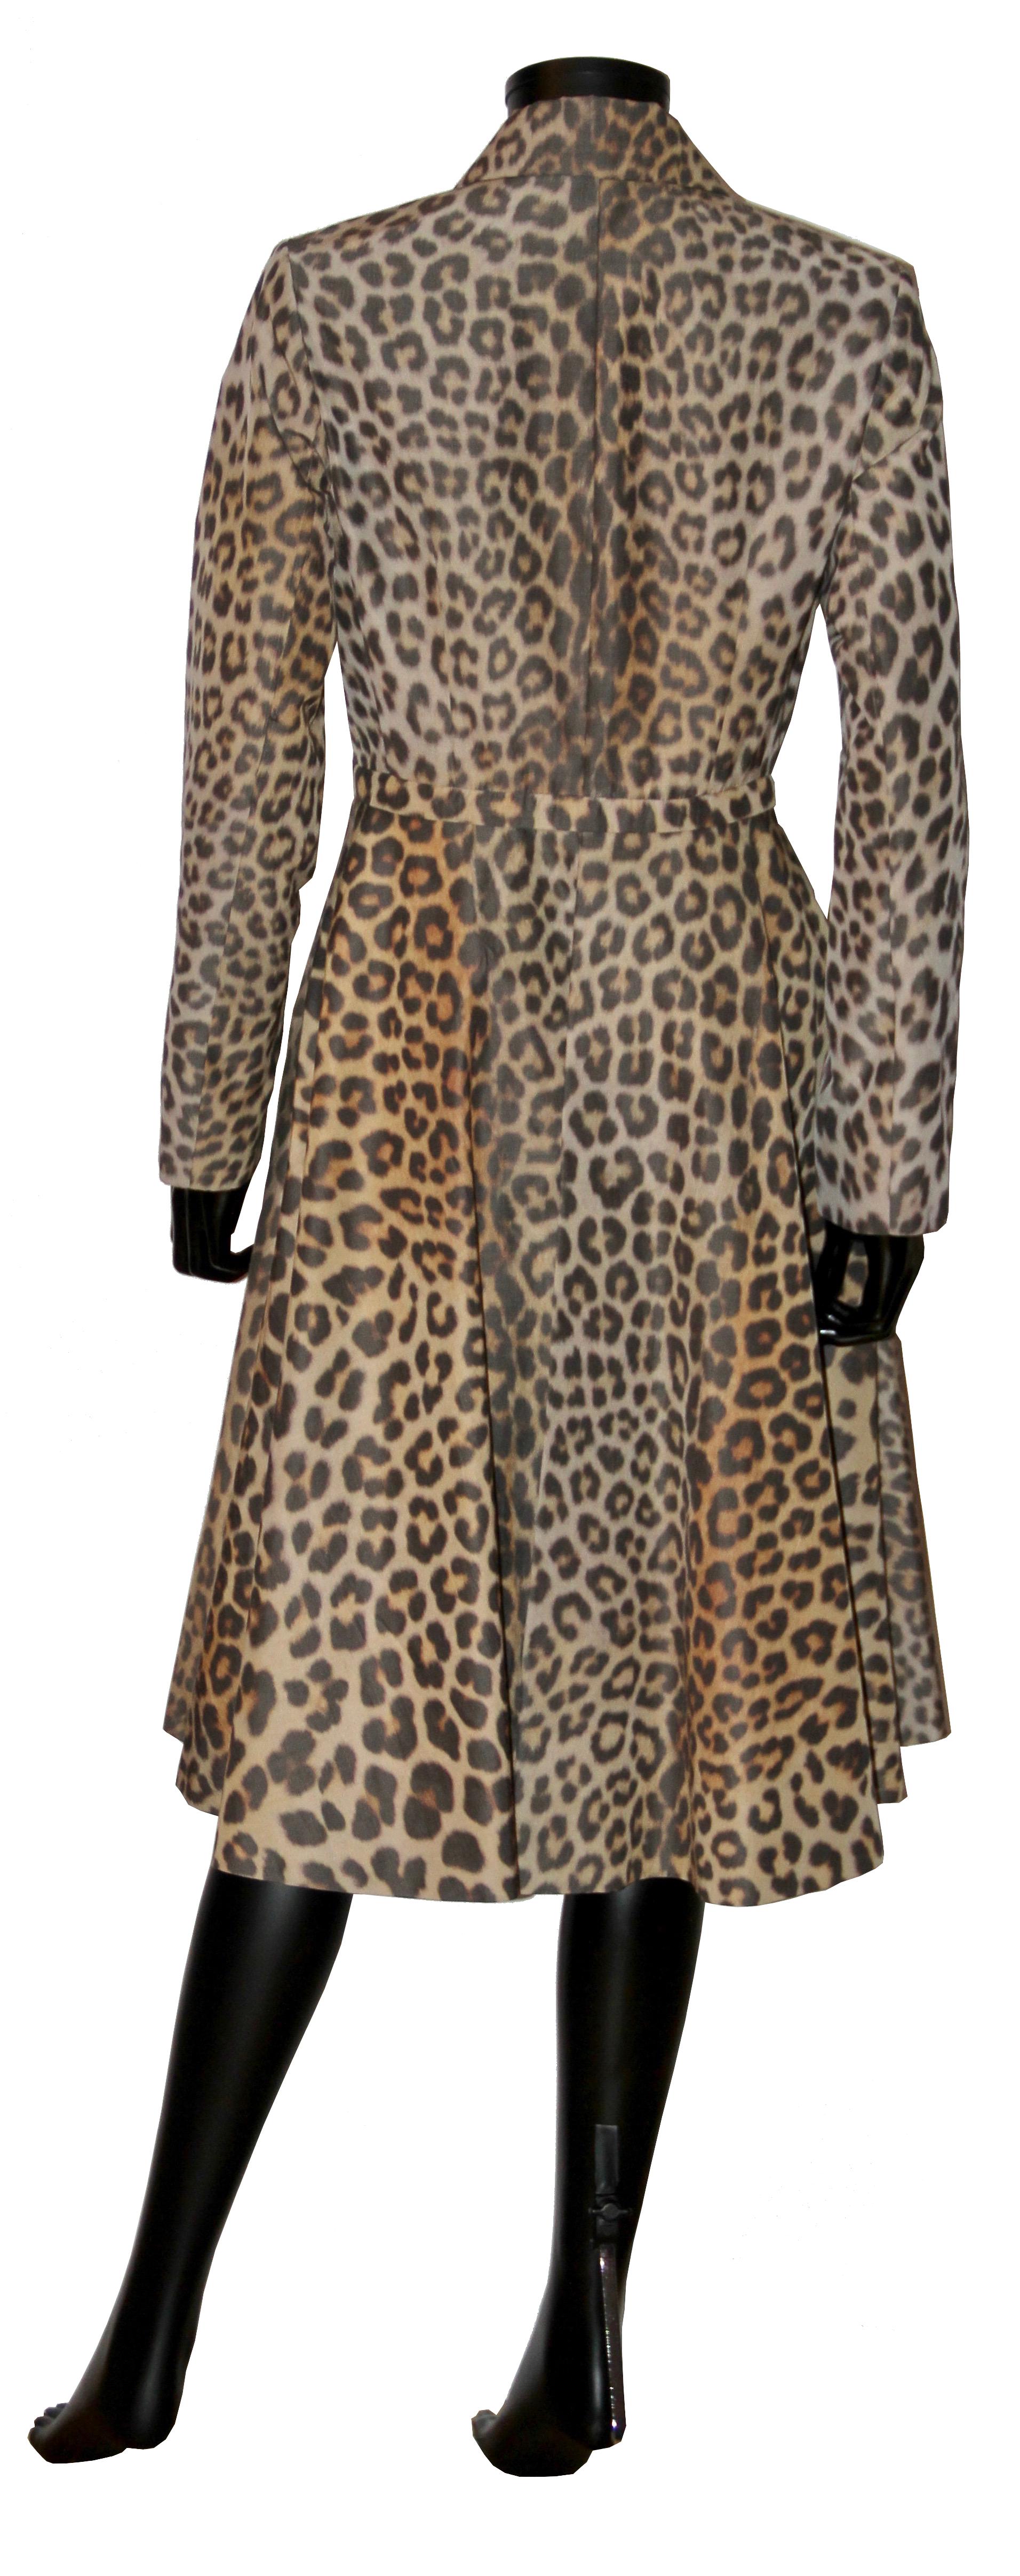 This very attractive animal print coat from Christian Dior can be worn as well as a jacket by unzipping the bottom part.
The waist is fitted giving it a 